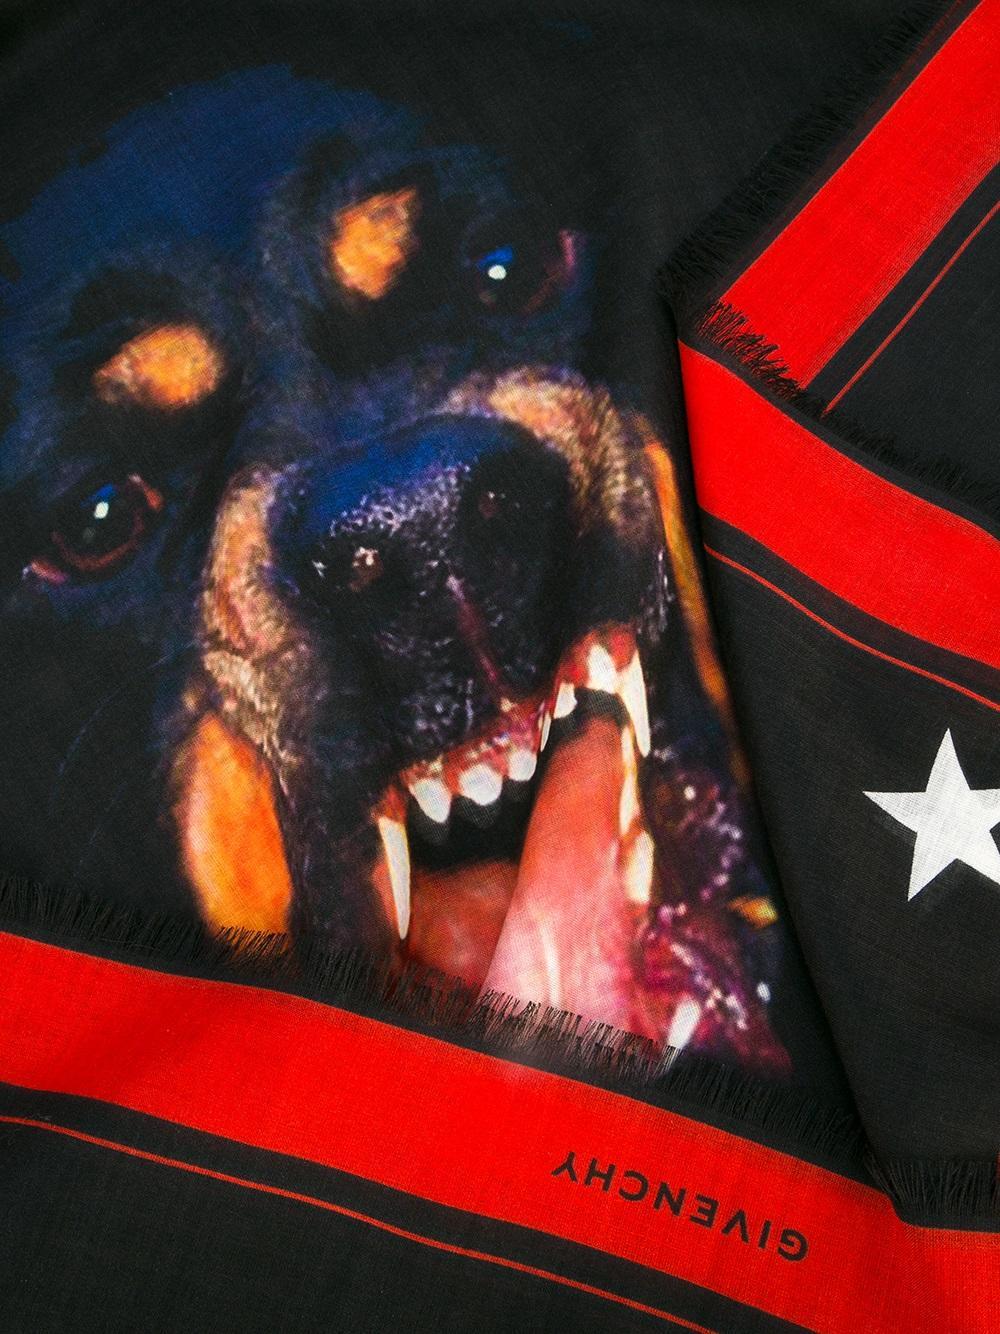 Givenchy Rottweiler Logo - Givenchy Rottweiler Print Scarf Black Red Women Accessories Scarves ...